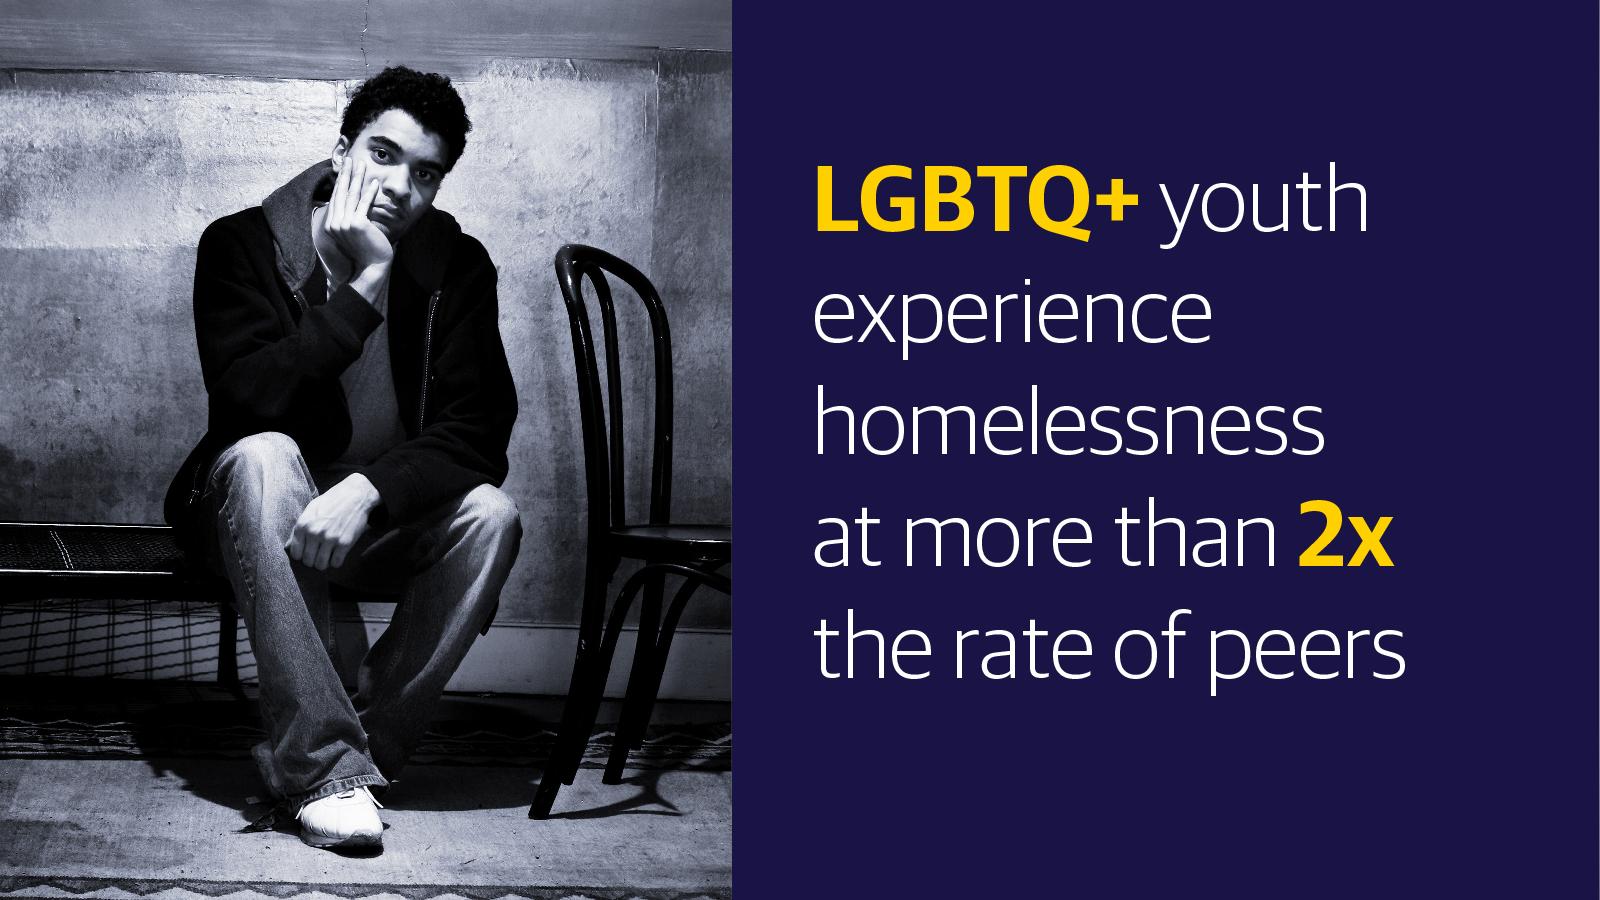 (slide 2 of 9) LGBTQ+ youth experience homelessness at more than 2x the rate of peers.. 